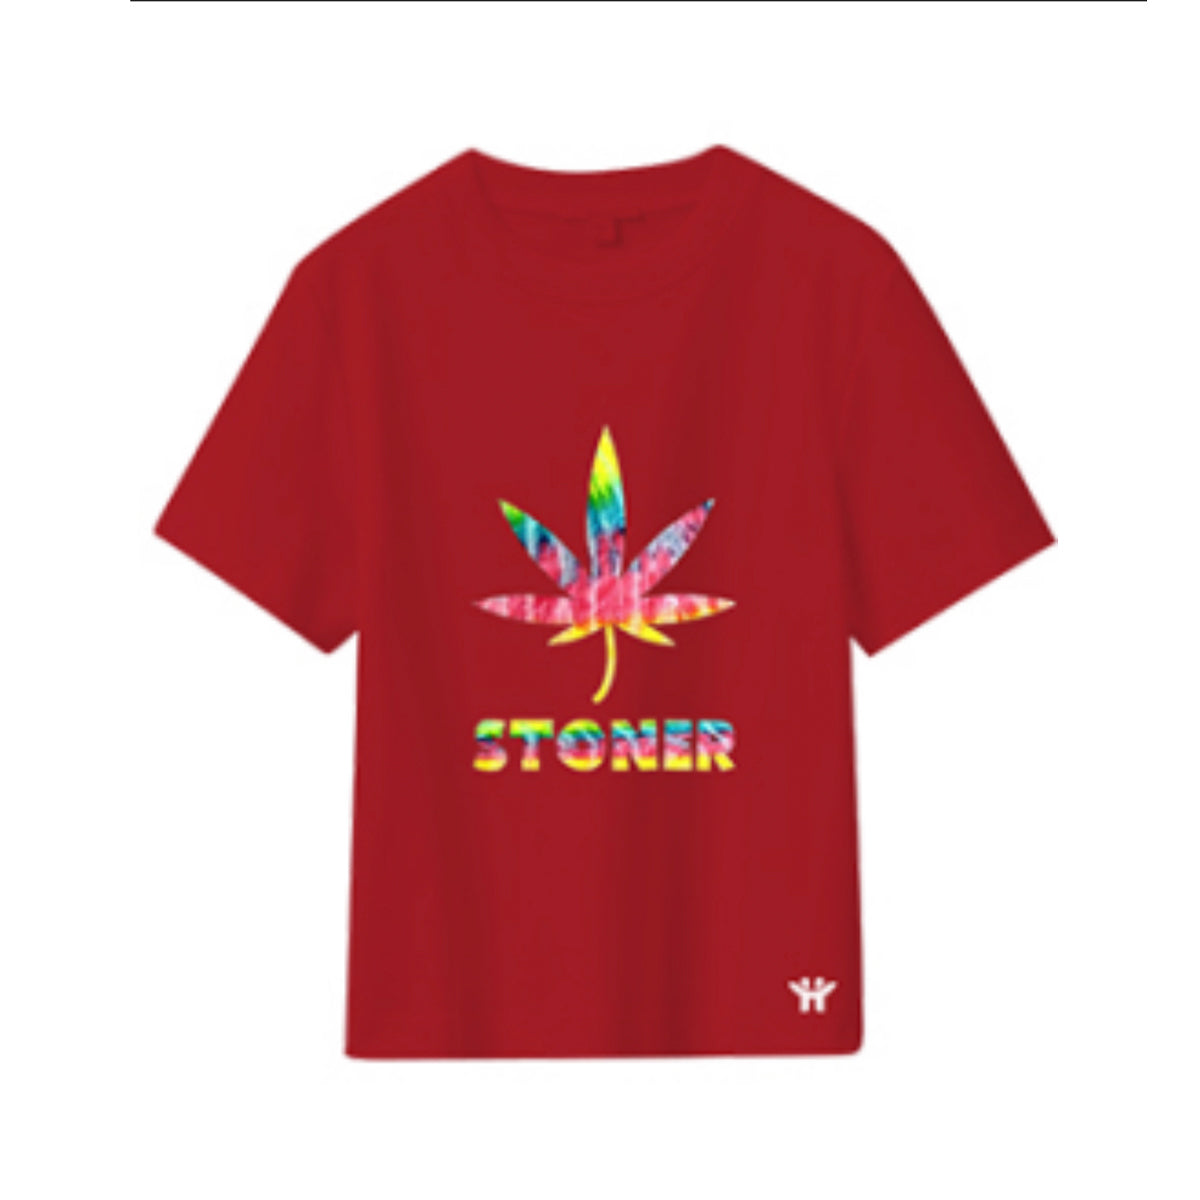 Stoner Design Red Polyester Short Sleeve T-Shirt - Pack of 6 Units  1S,1M, 1L, 1XL, 2XL, 3XL